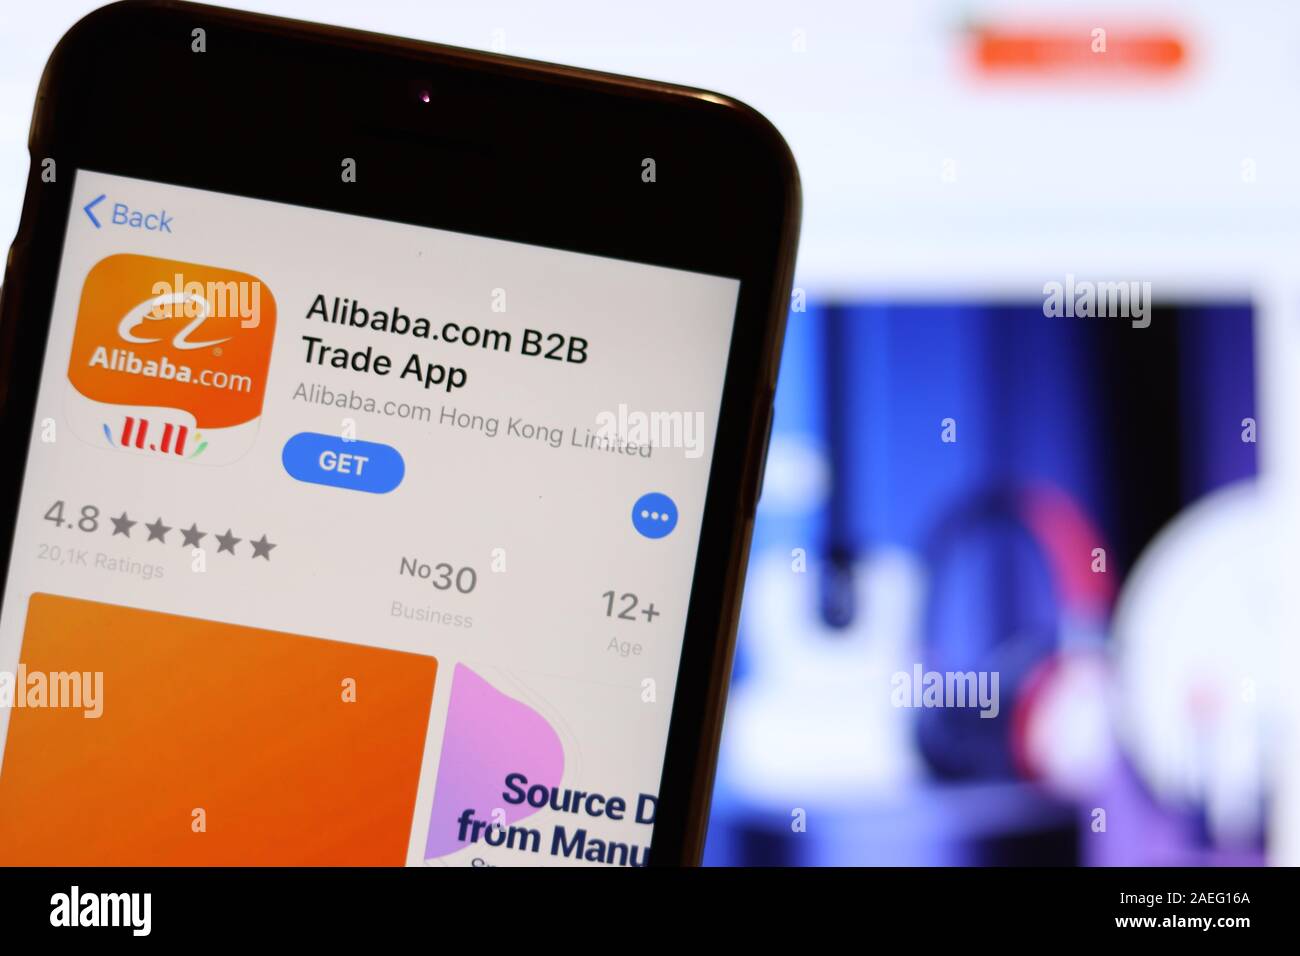 Los Angeles, California, USA - 26 November 2019: Alibaba Trade App icon on phone screen with logo on blurry background, Illustrative Editorial. Stock Photo